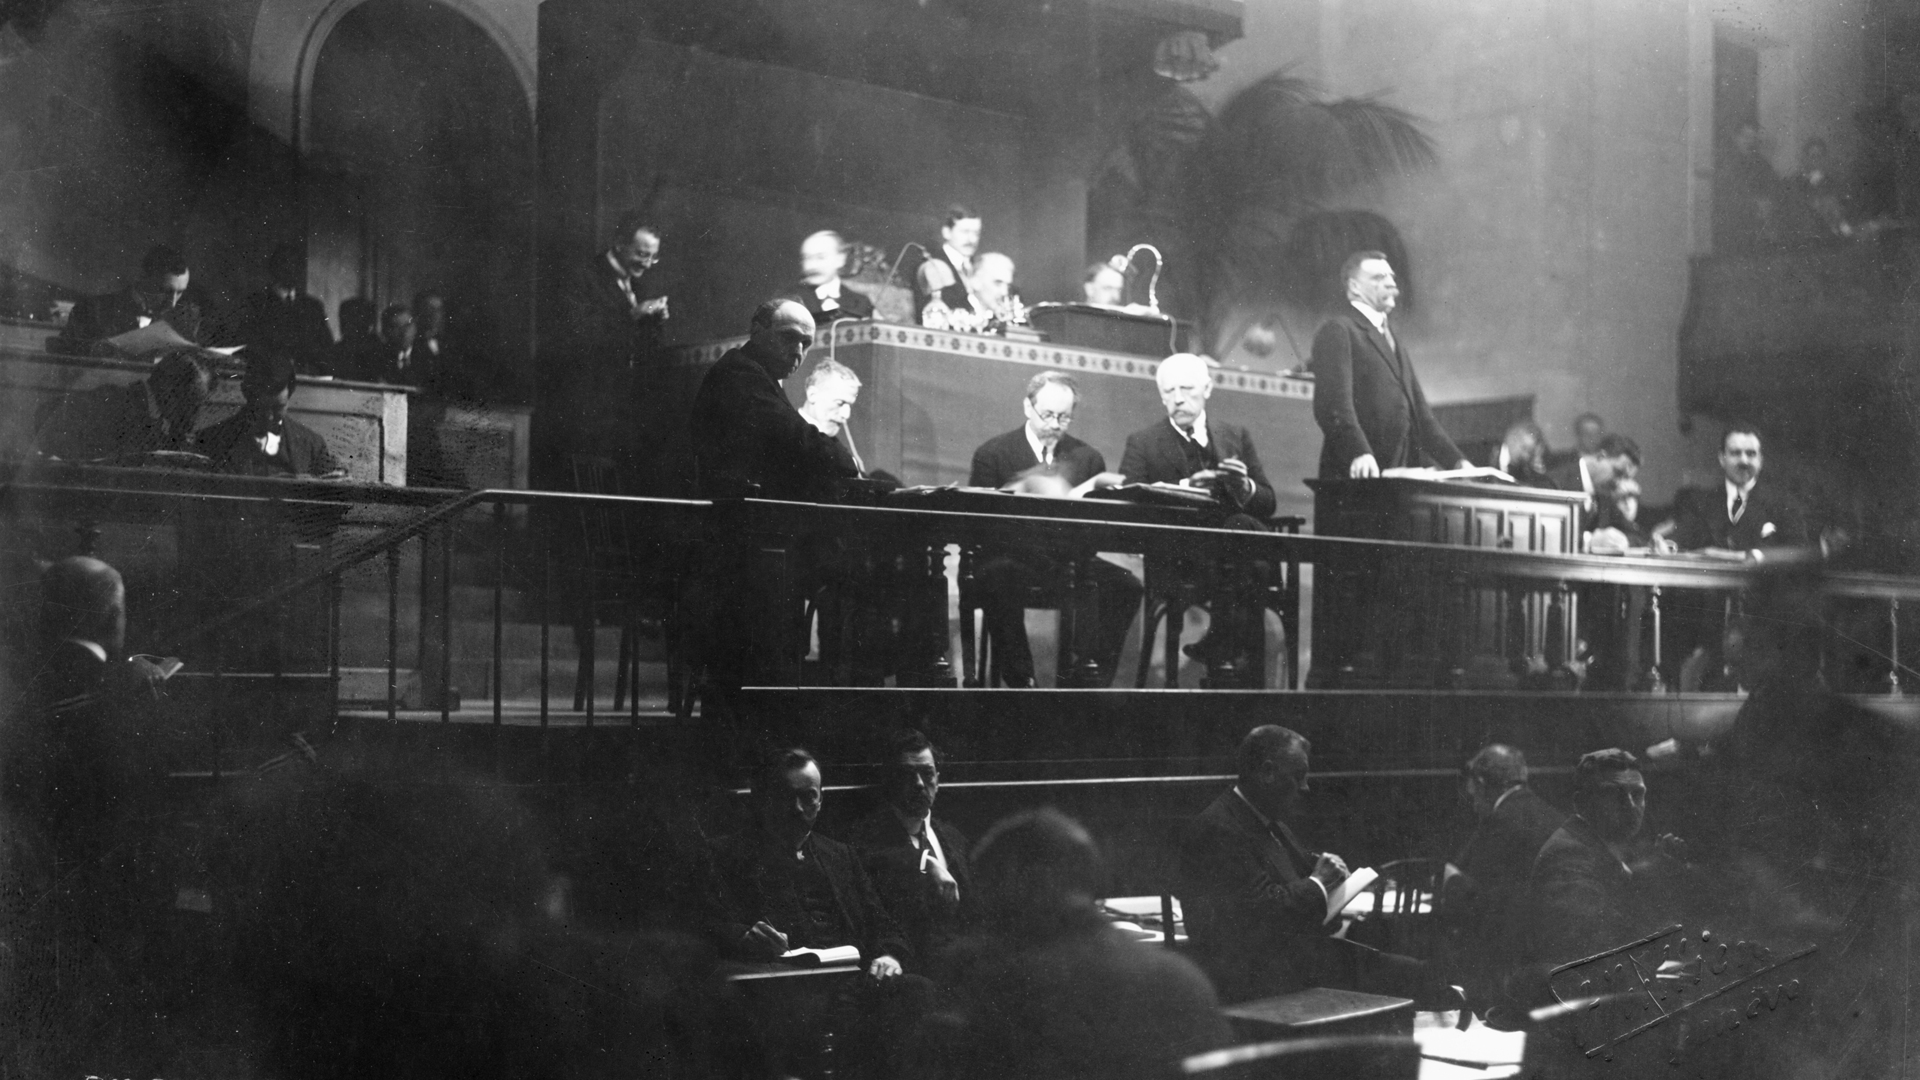 <p>After the First World War, peace is finally ratified, and the League of Nations (a precursor to the United Nations) is established to counteract future wars across the globe.</p>